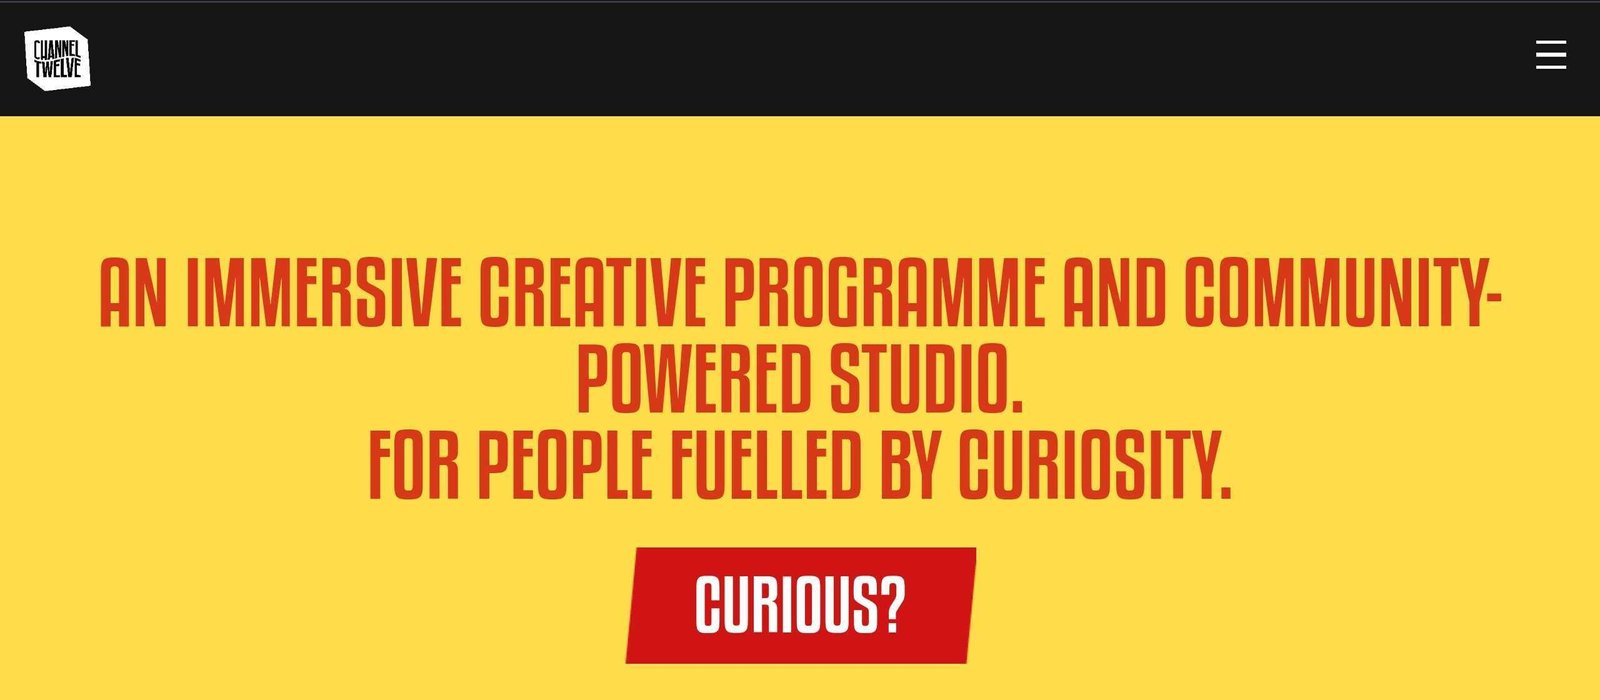 "Curious?" Is a really unique call to action used in this example